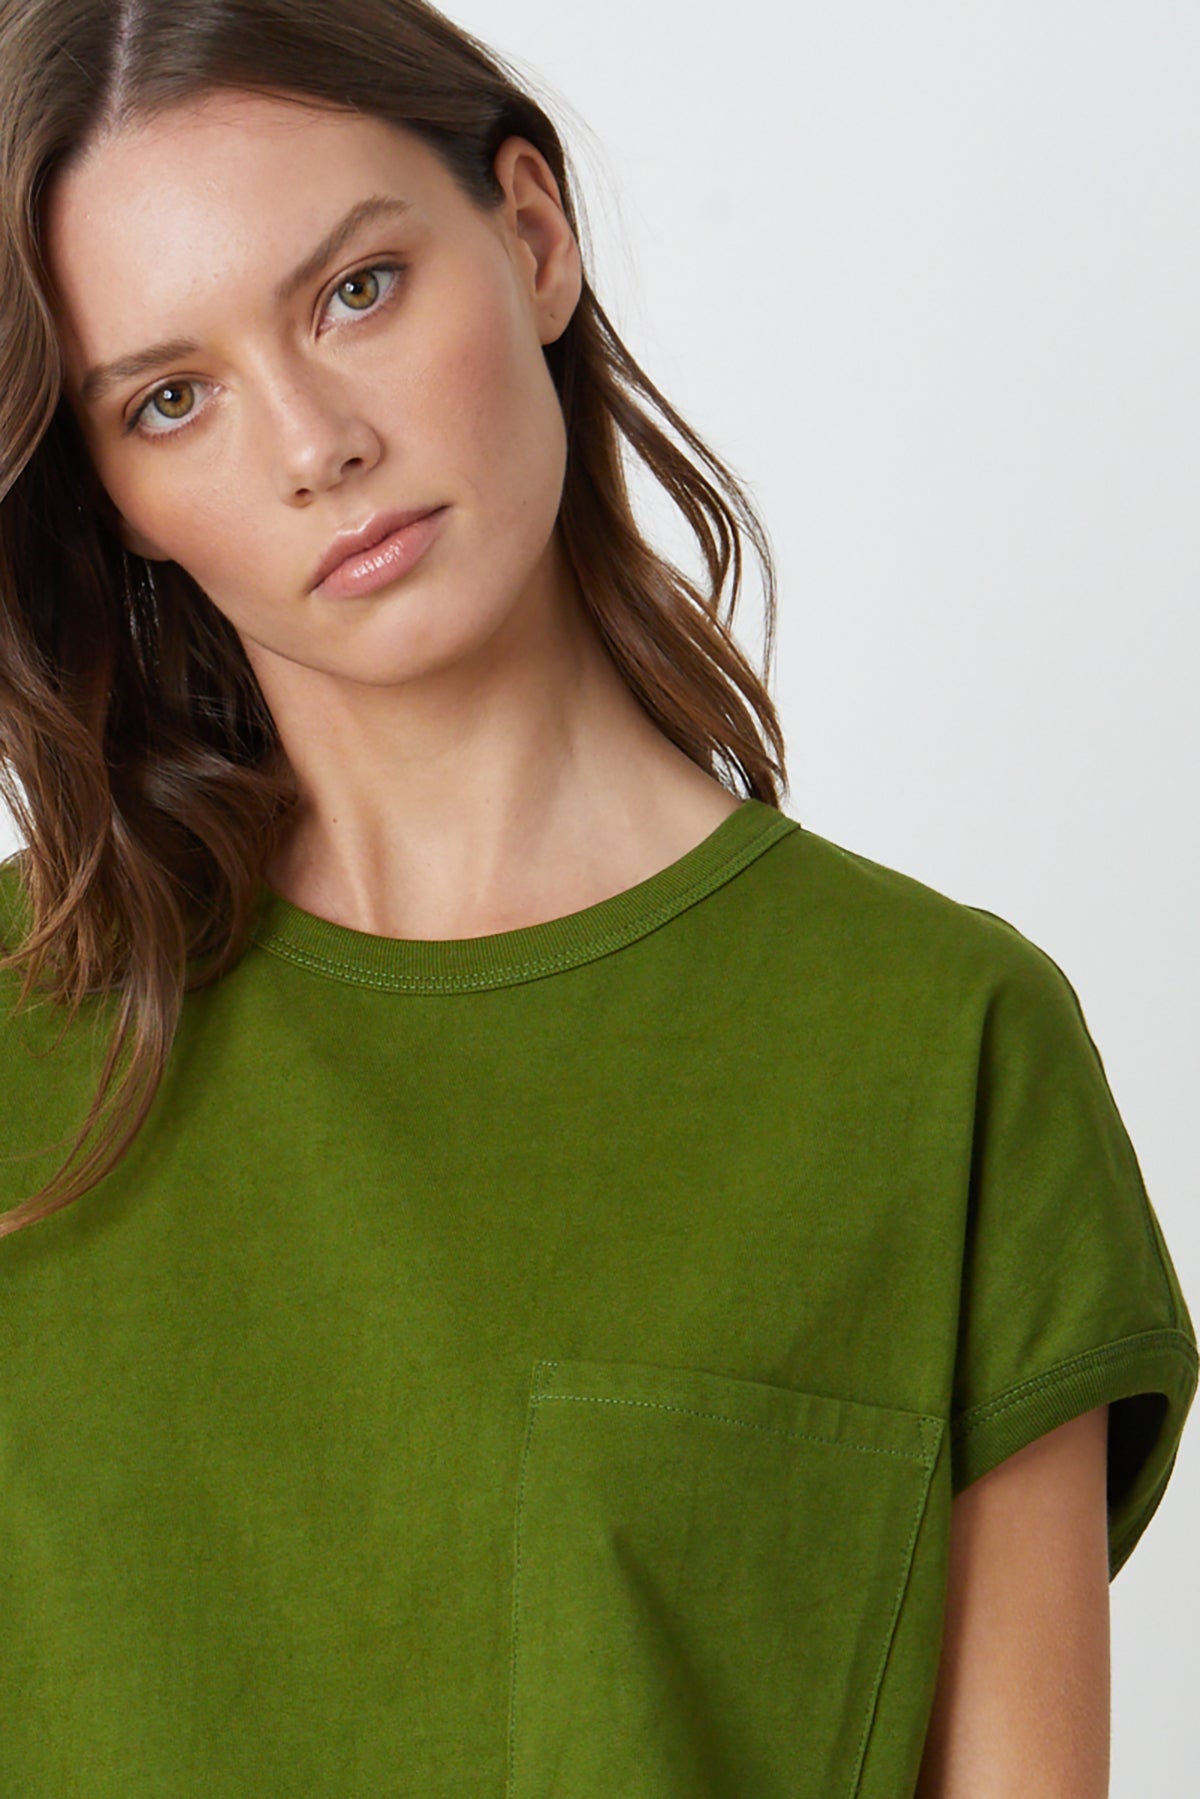 The model is wearing a green Cassidy Crew Neck Dress with a pocket by Velvet by Graham & Spencer.-26342692749505